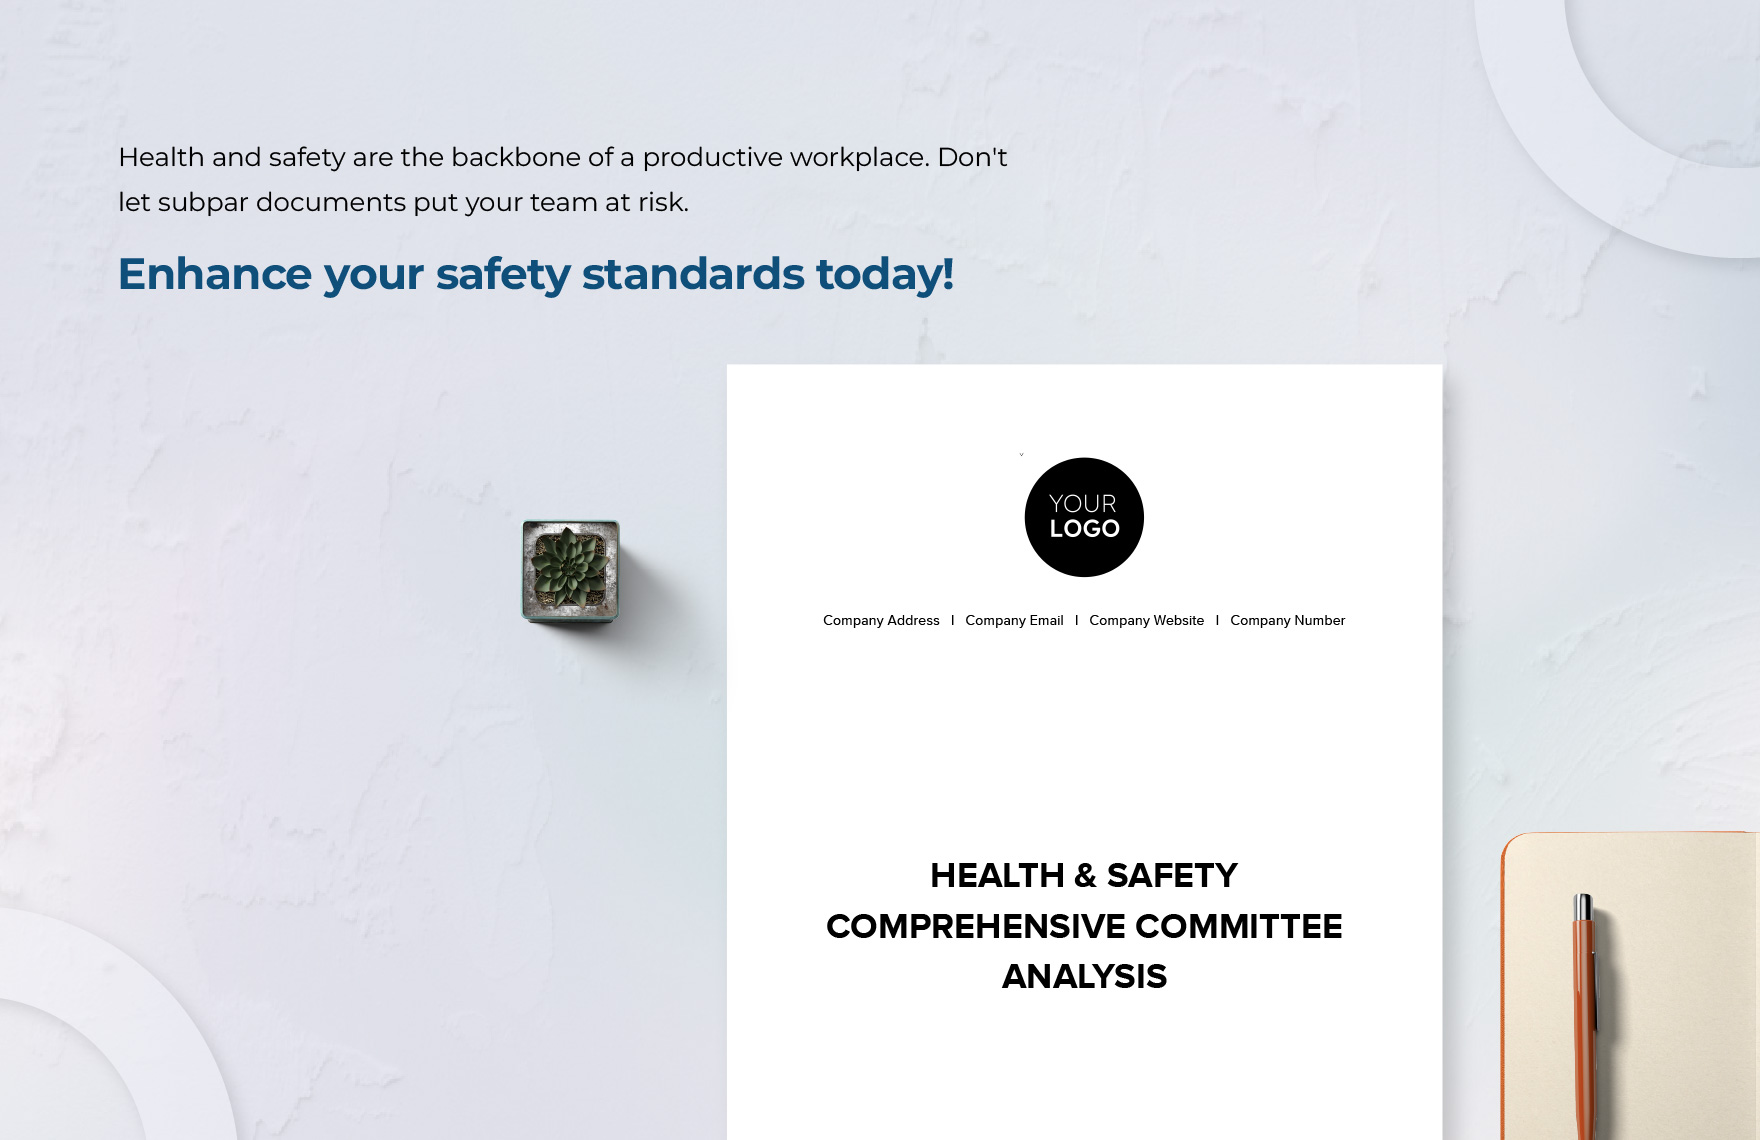 Health & Safety Comprehensive Committee Analysis Template